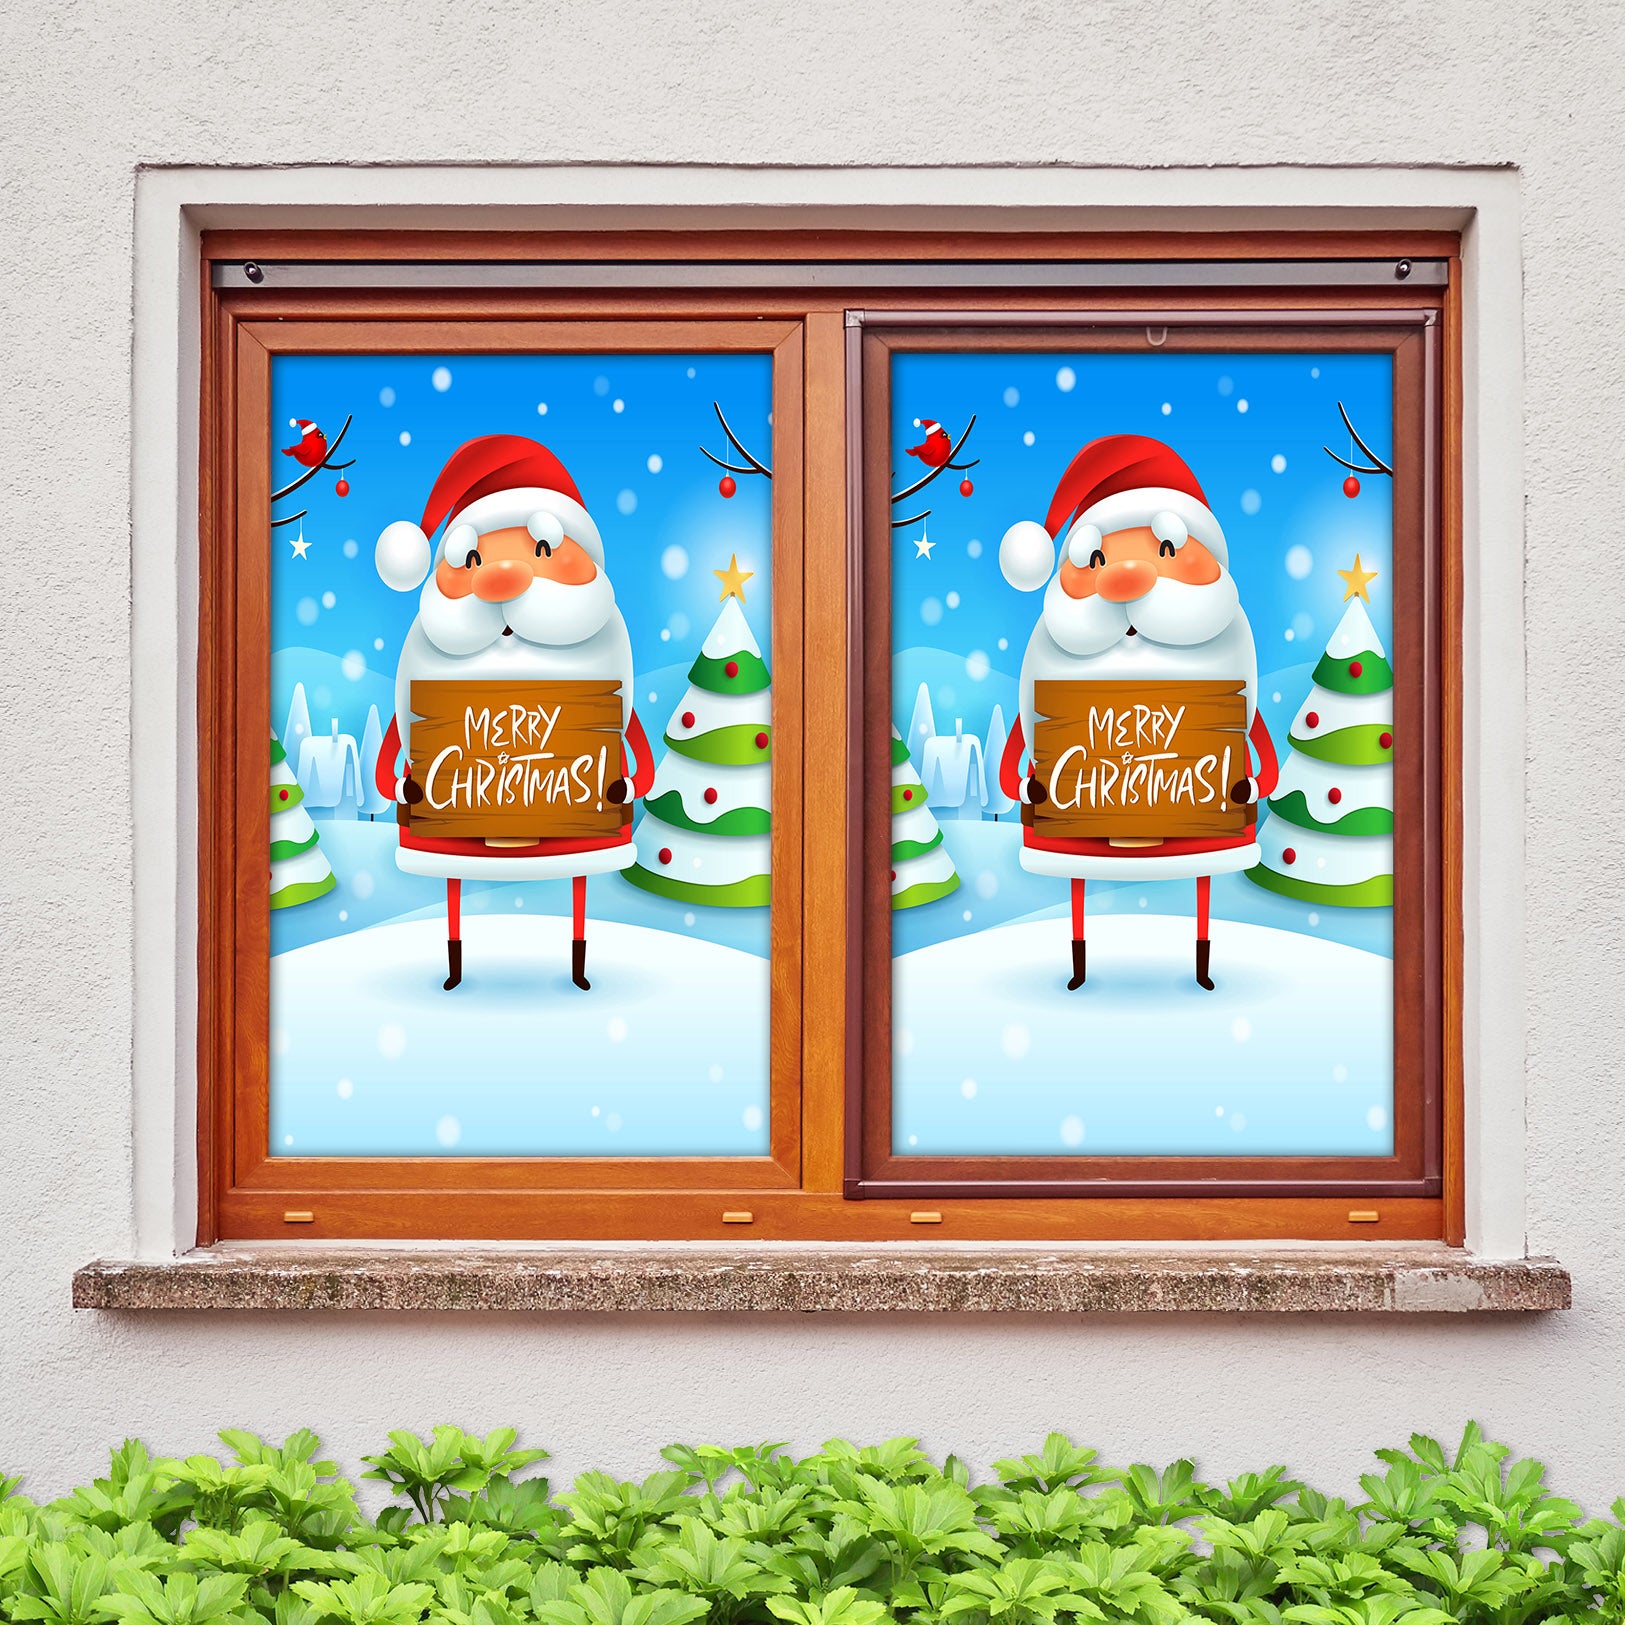 3D Santa Claus 31070 Christmas Window Film Print Sticker Cling Stained Glass Xmas